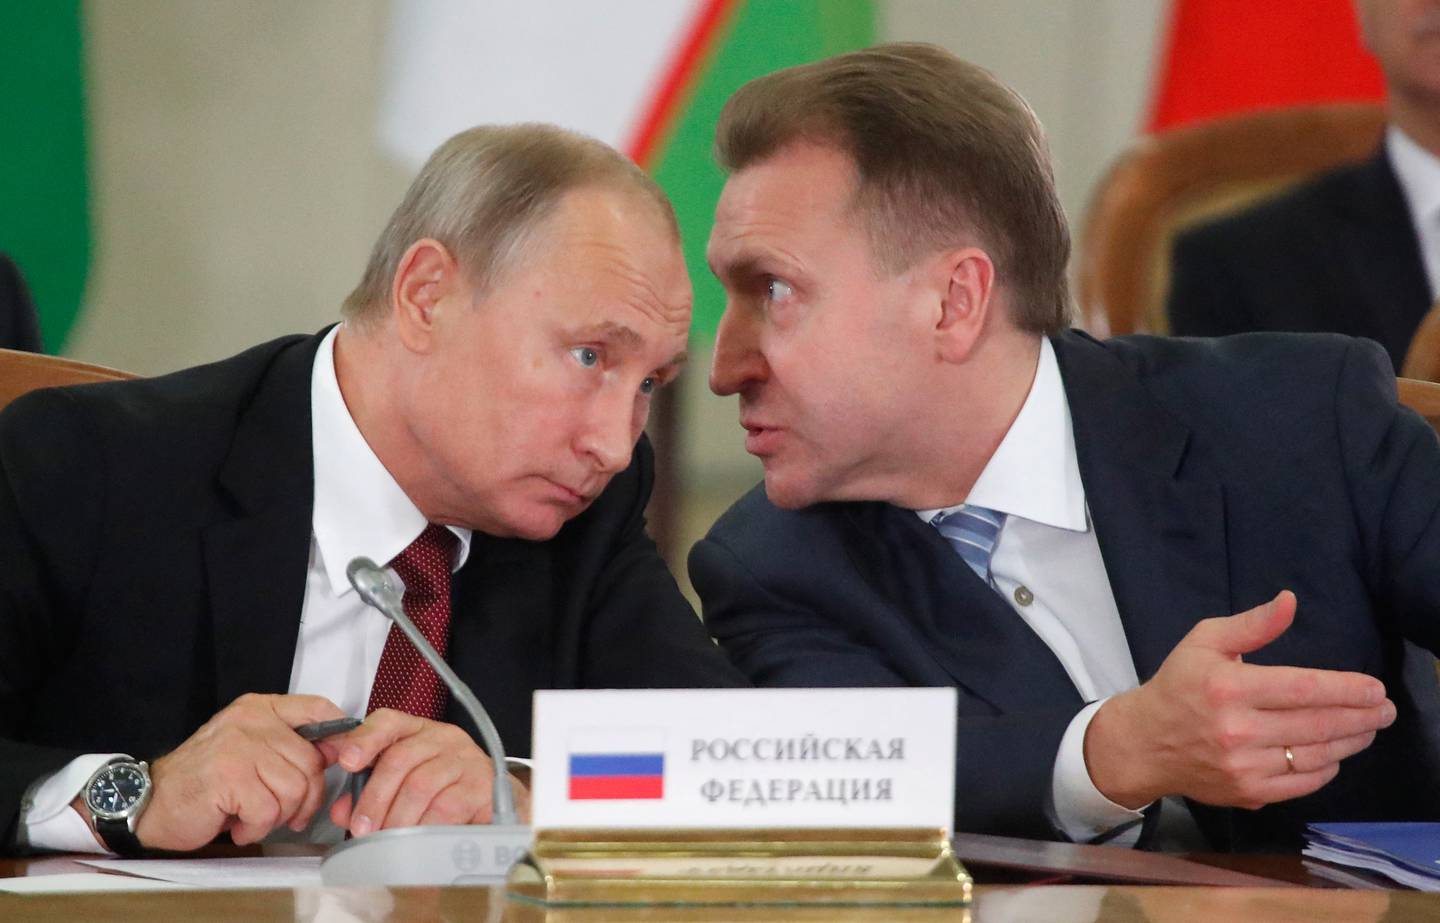 Then Russian deputy prime minister Igor Shuvalov had the ear or Russia's leader, AFP